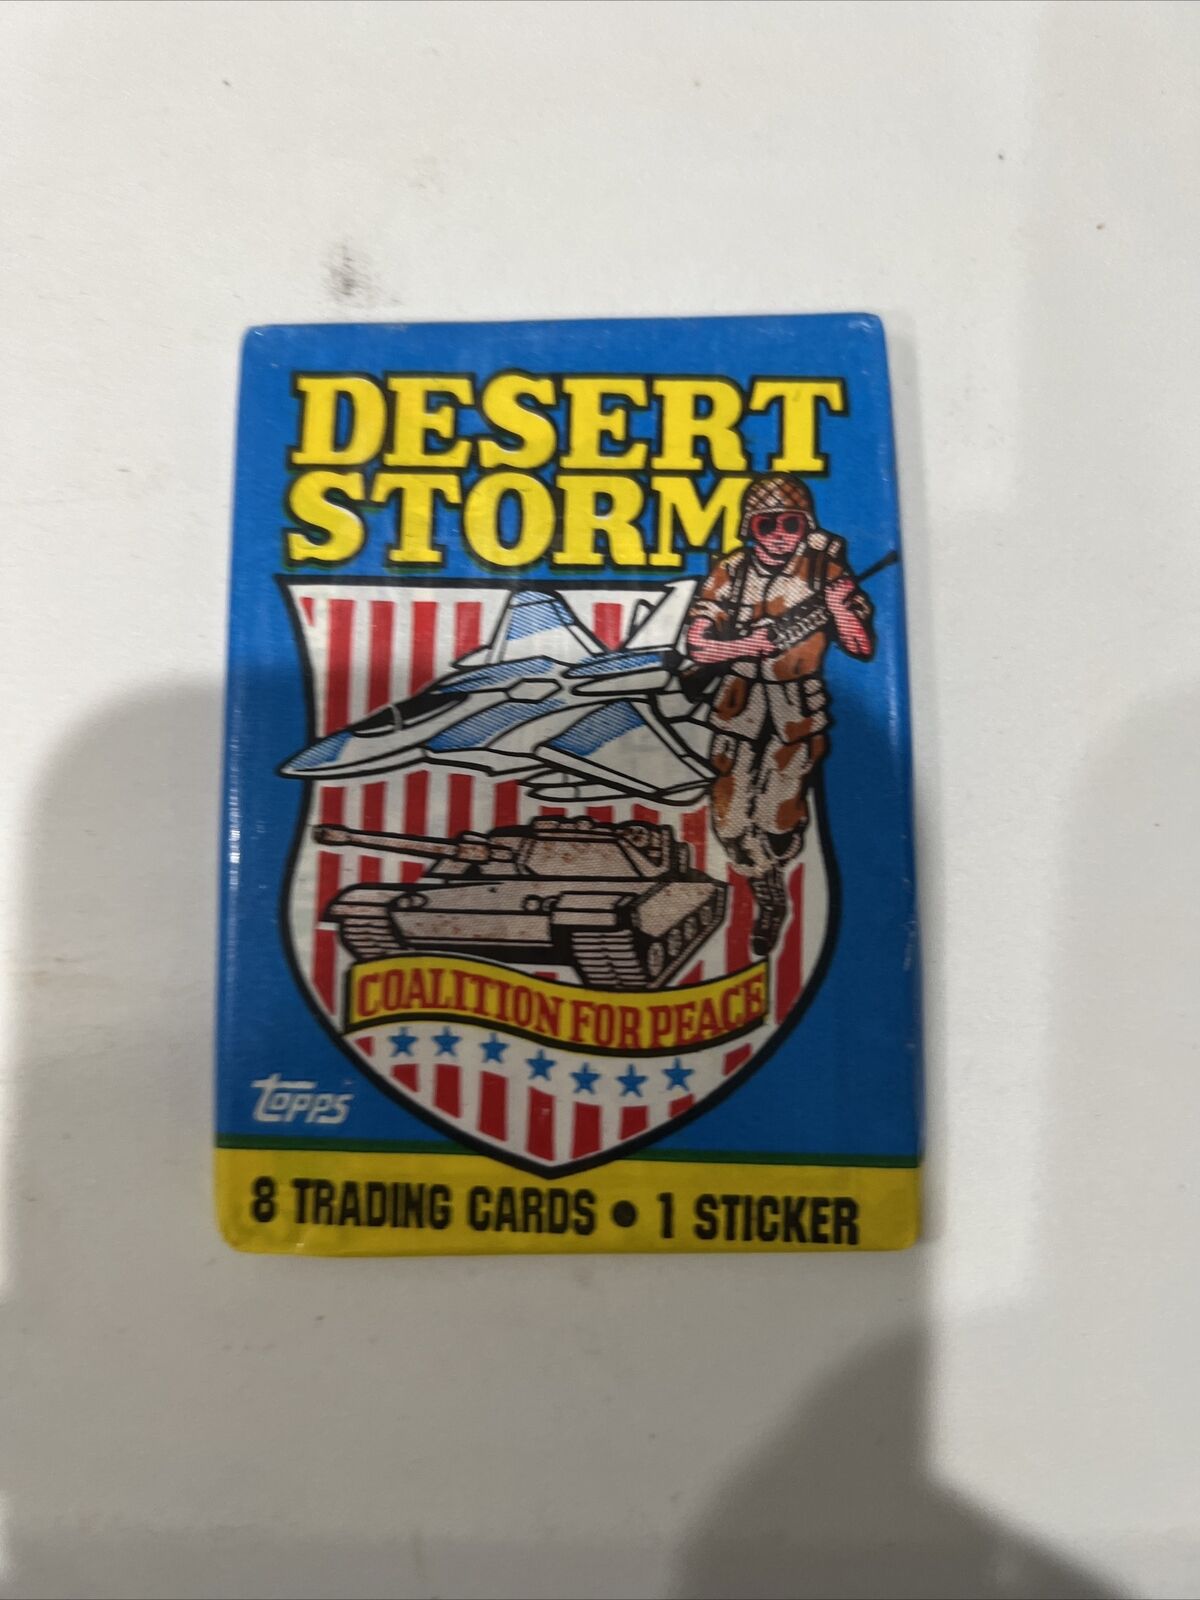 1991 Topps Desert Storm Trading Cards Sticker Coalition For Peace Unopened Pack